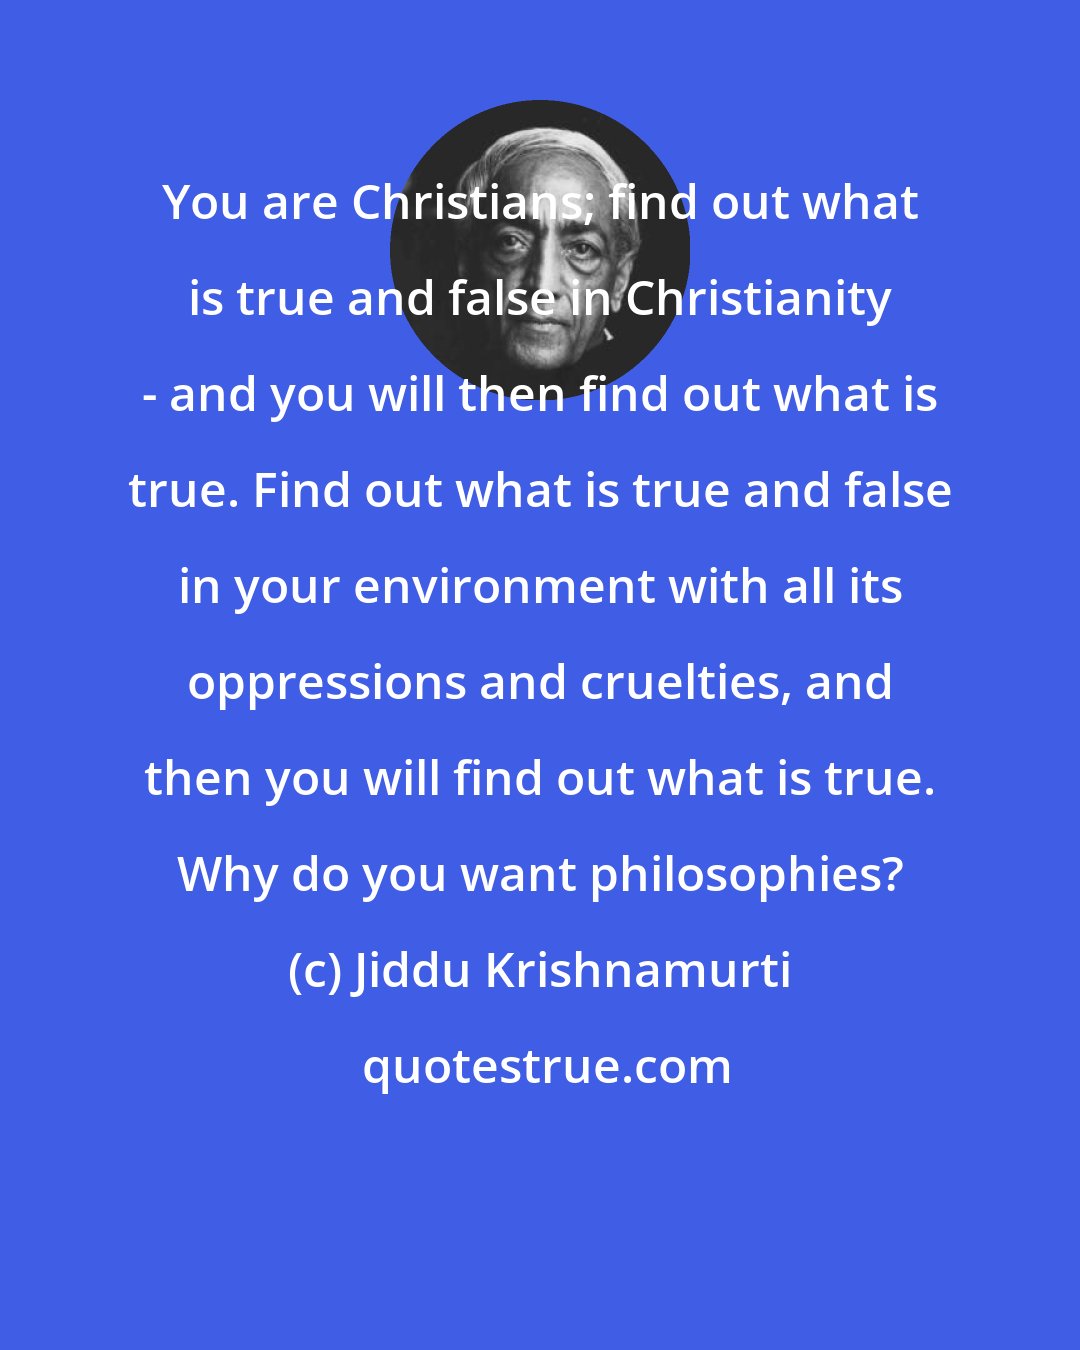 Jiddu Krishnamurti: You are Christians; find out what is true and false in Christianity - and you will then find out what is true. Find out what is true and false in your environment with all its oppressions and cruelties, and then you will find out what is true. Why do you want philosophies?